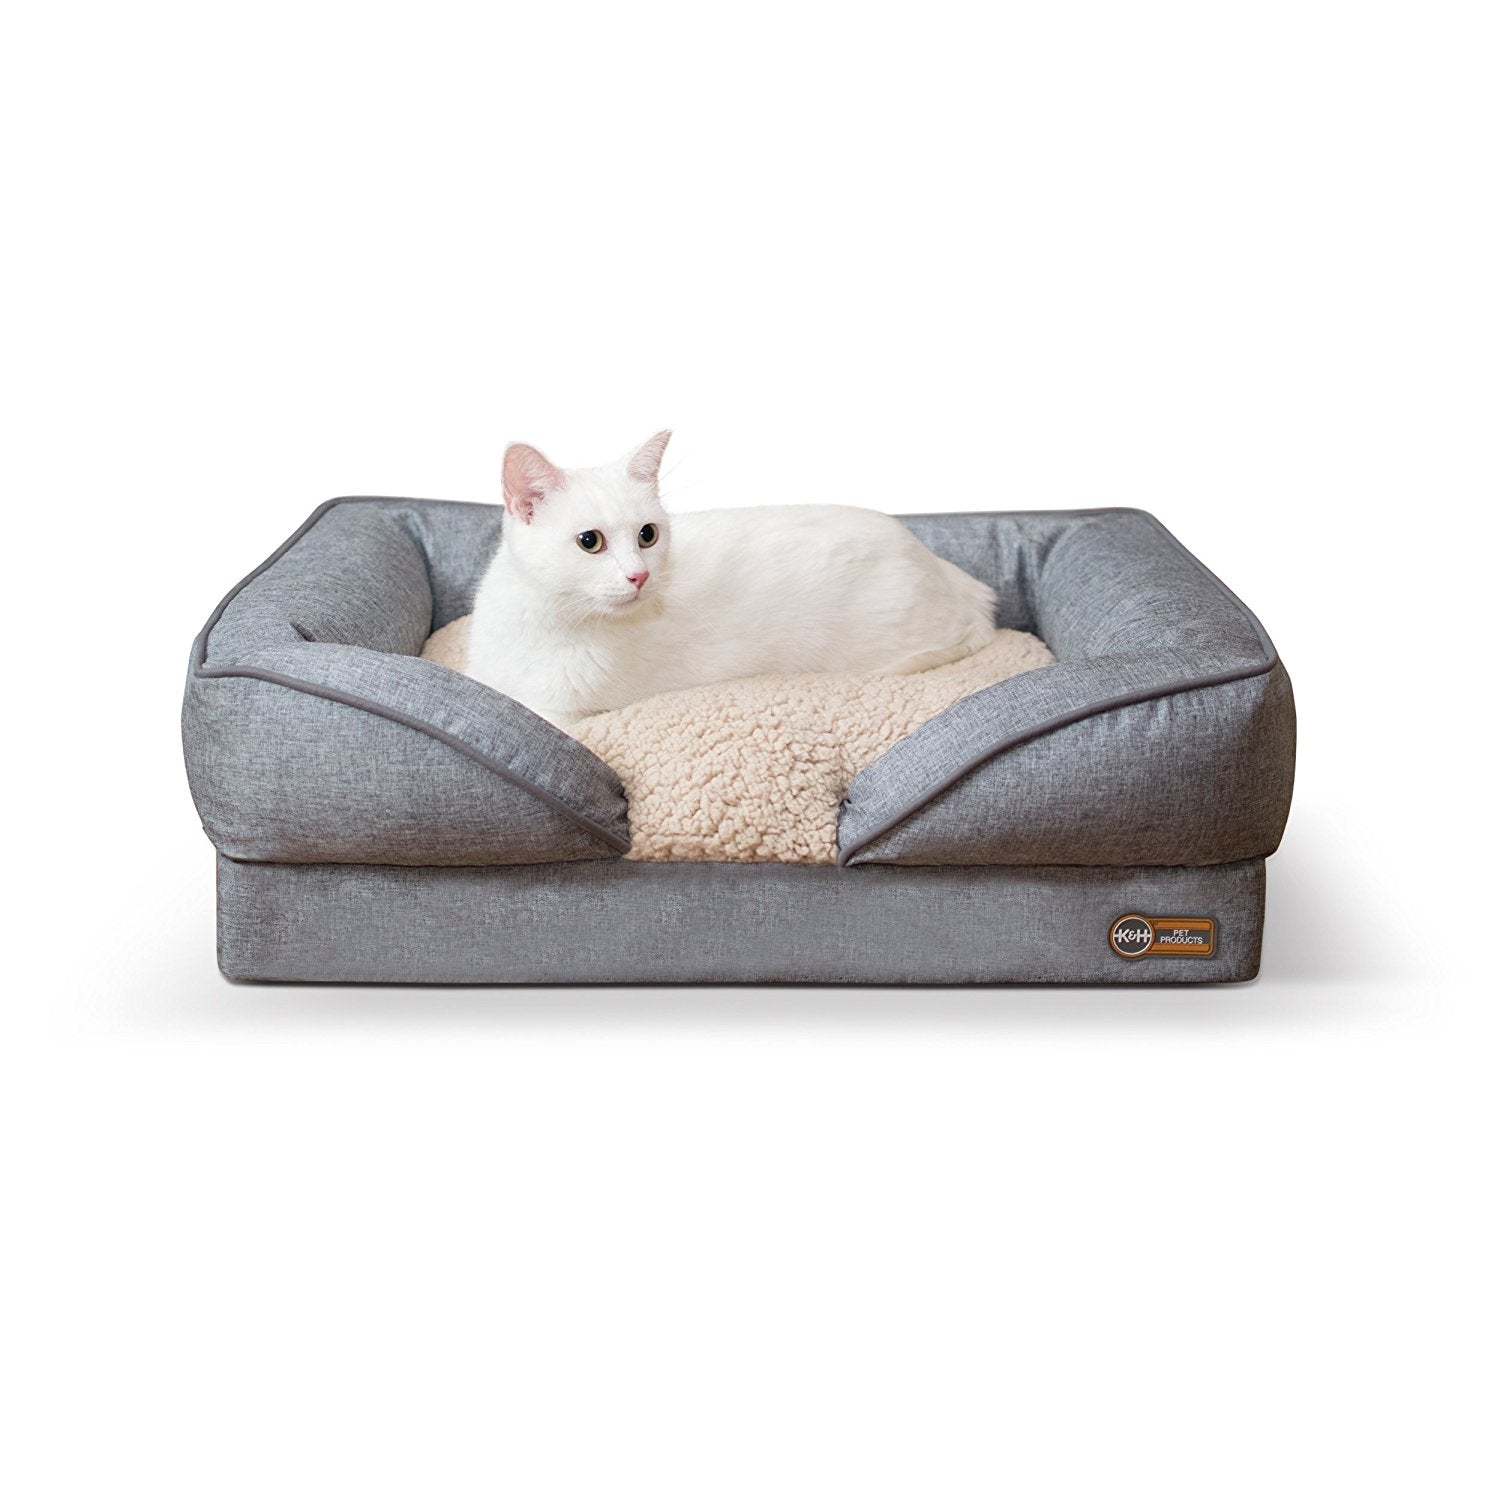 K&h Pet Products Kh4772 Pillow-top Orthopedic Pet Lounger